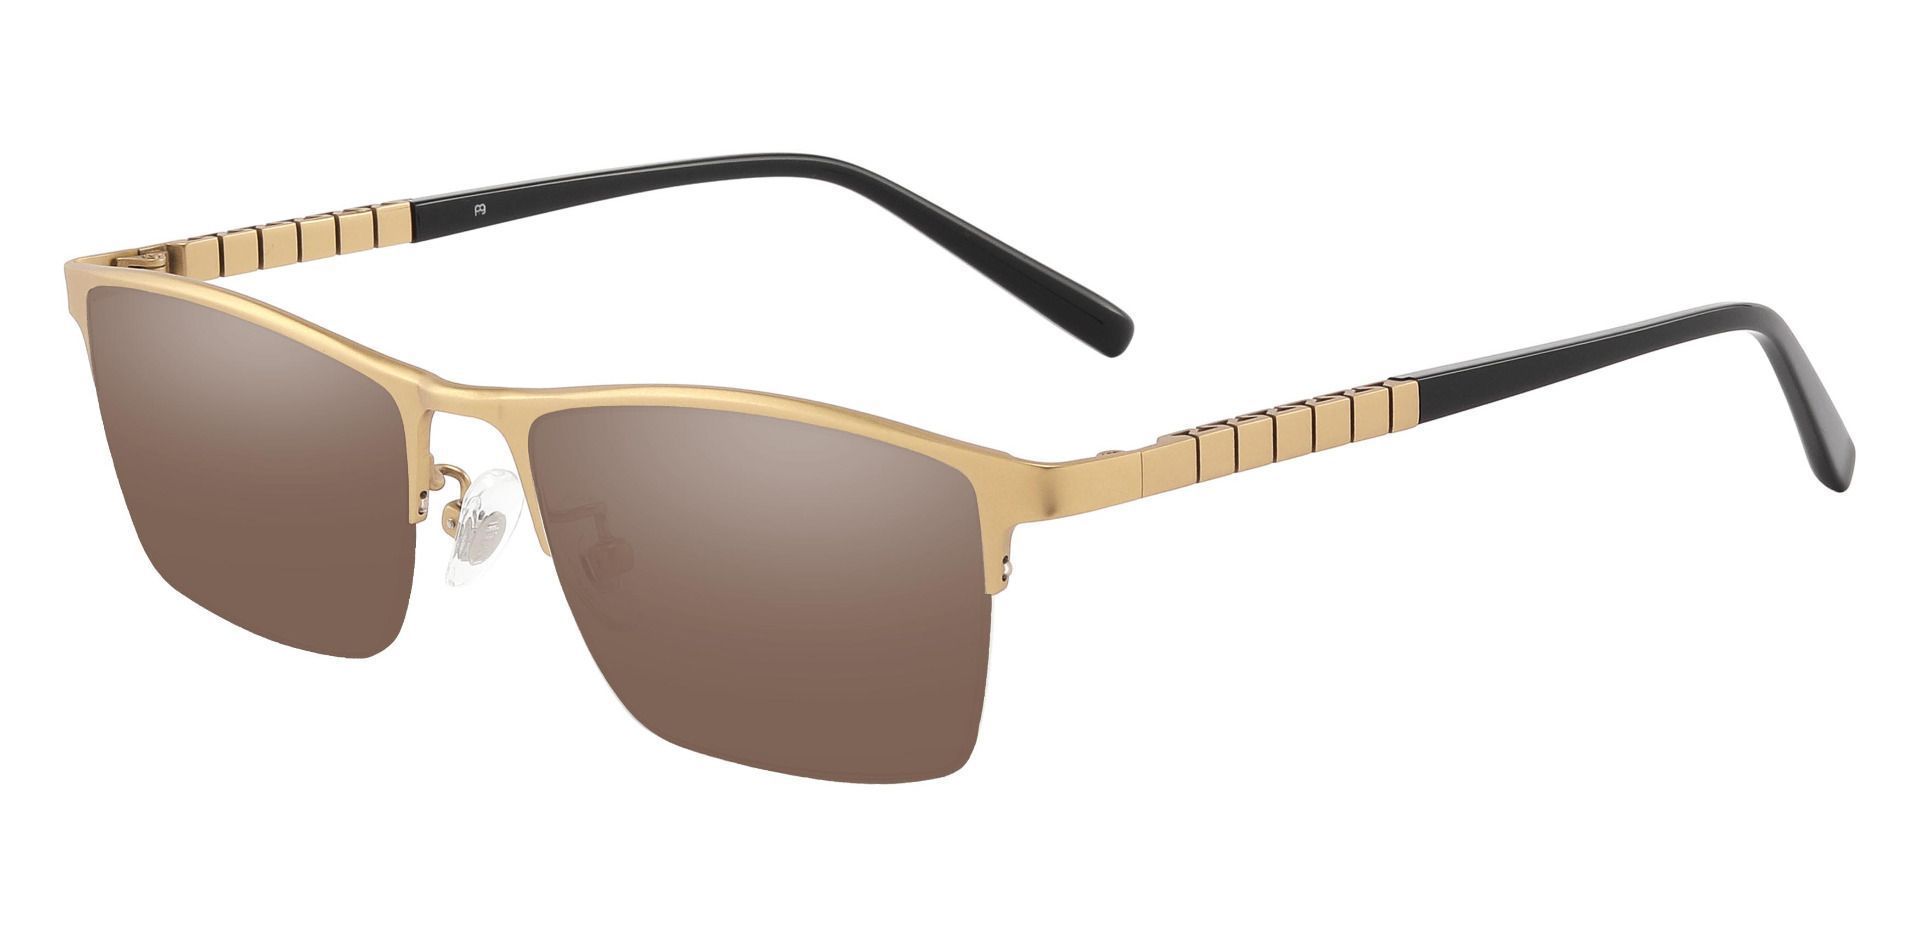 Maine Rectangle Reading Sunglasses - Gold Frame With Brown Lenses